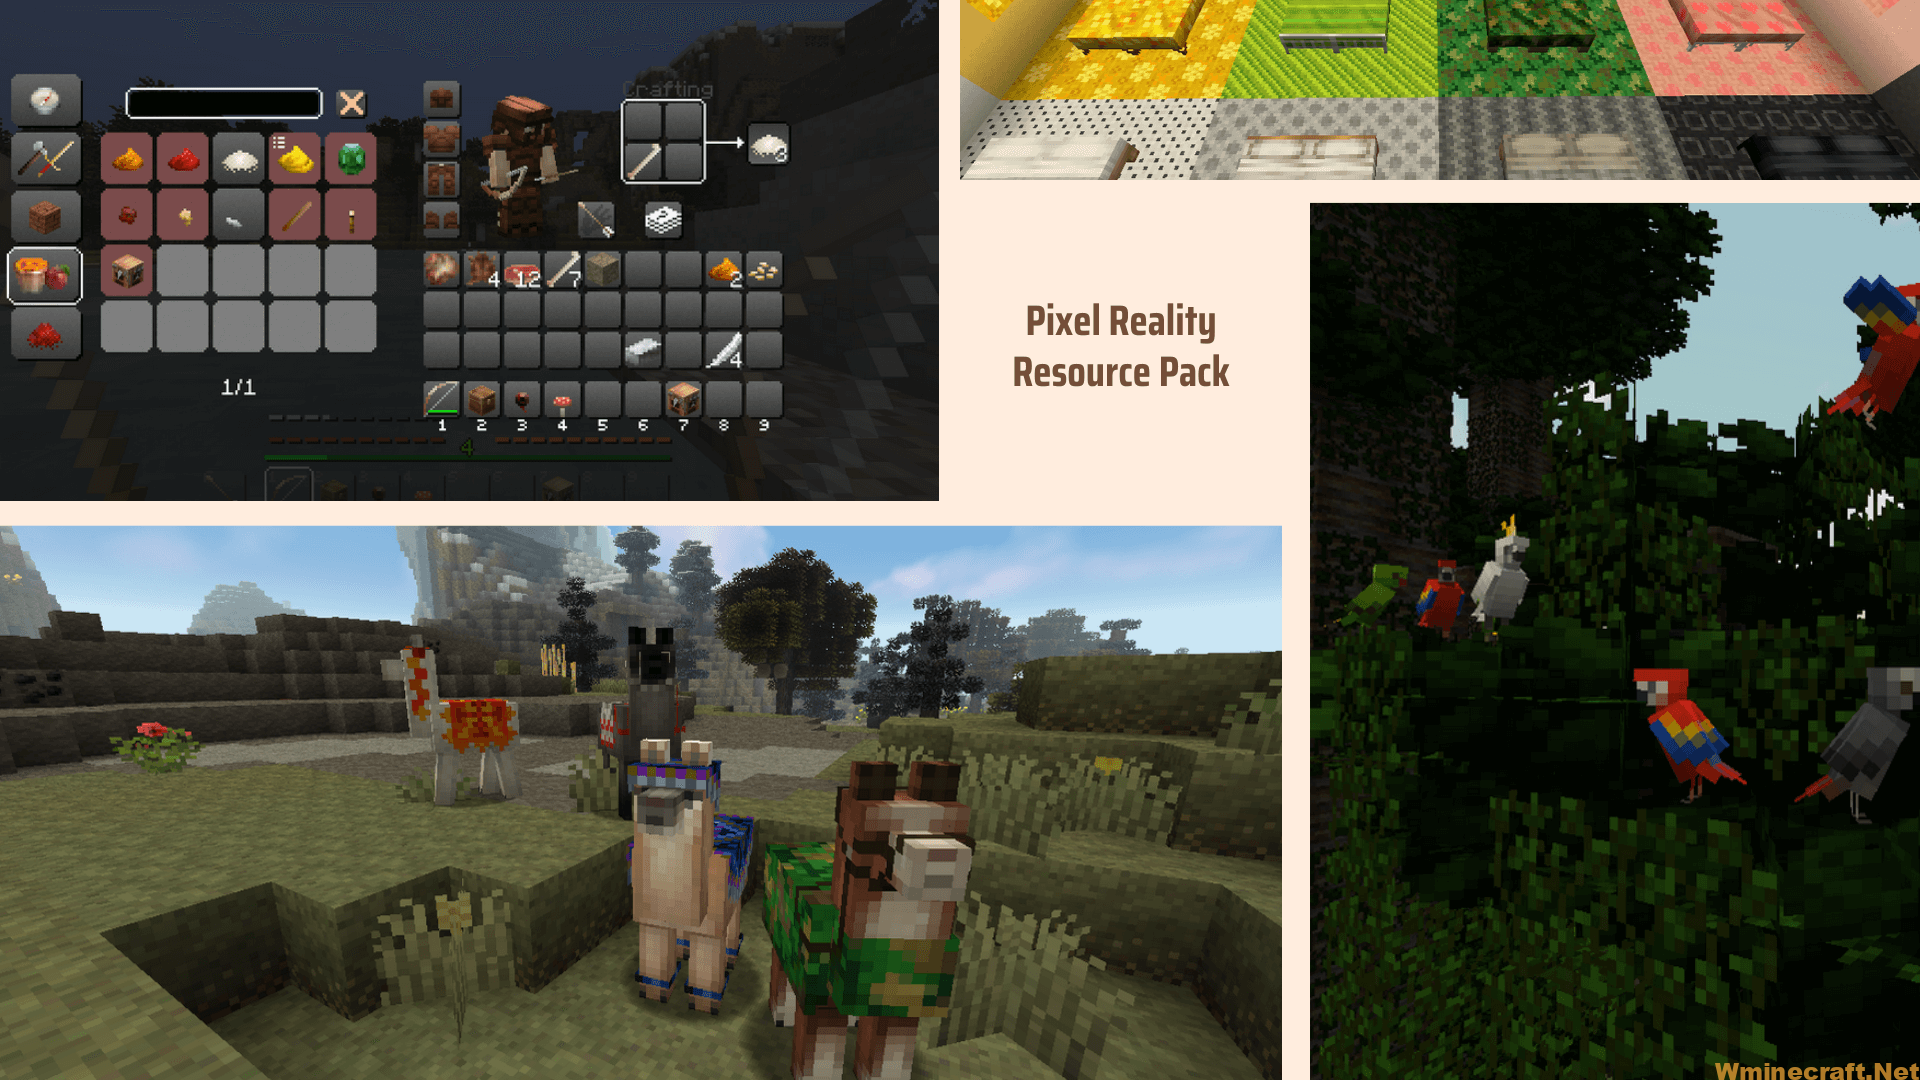 Pixel Reality Resource Pack